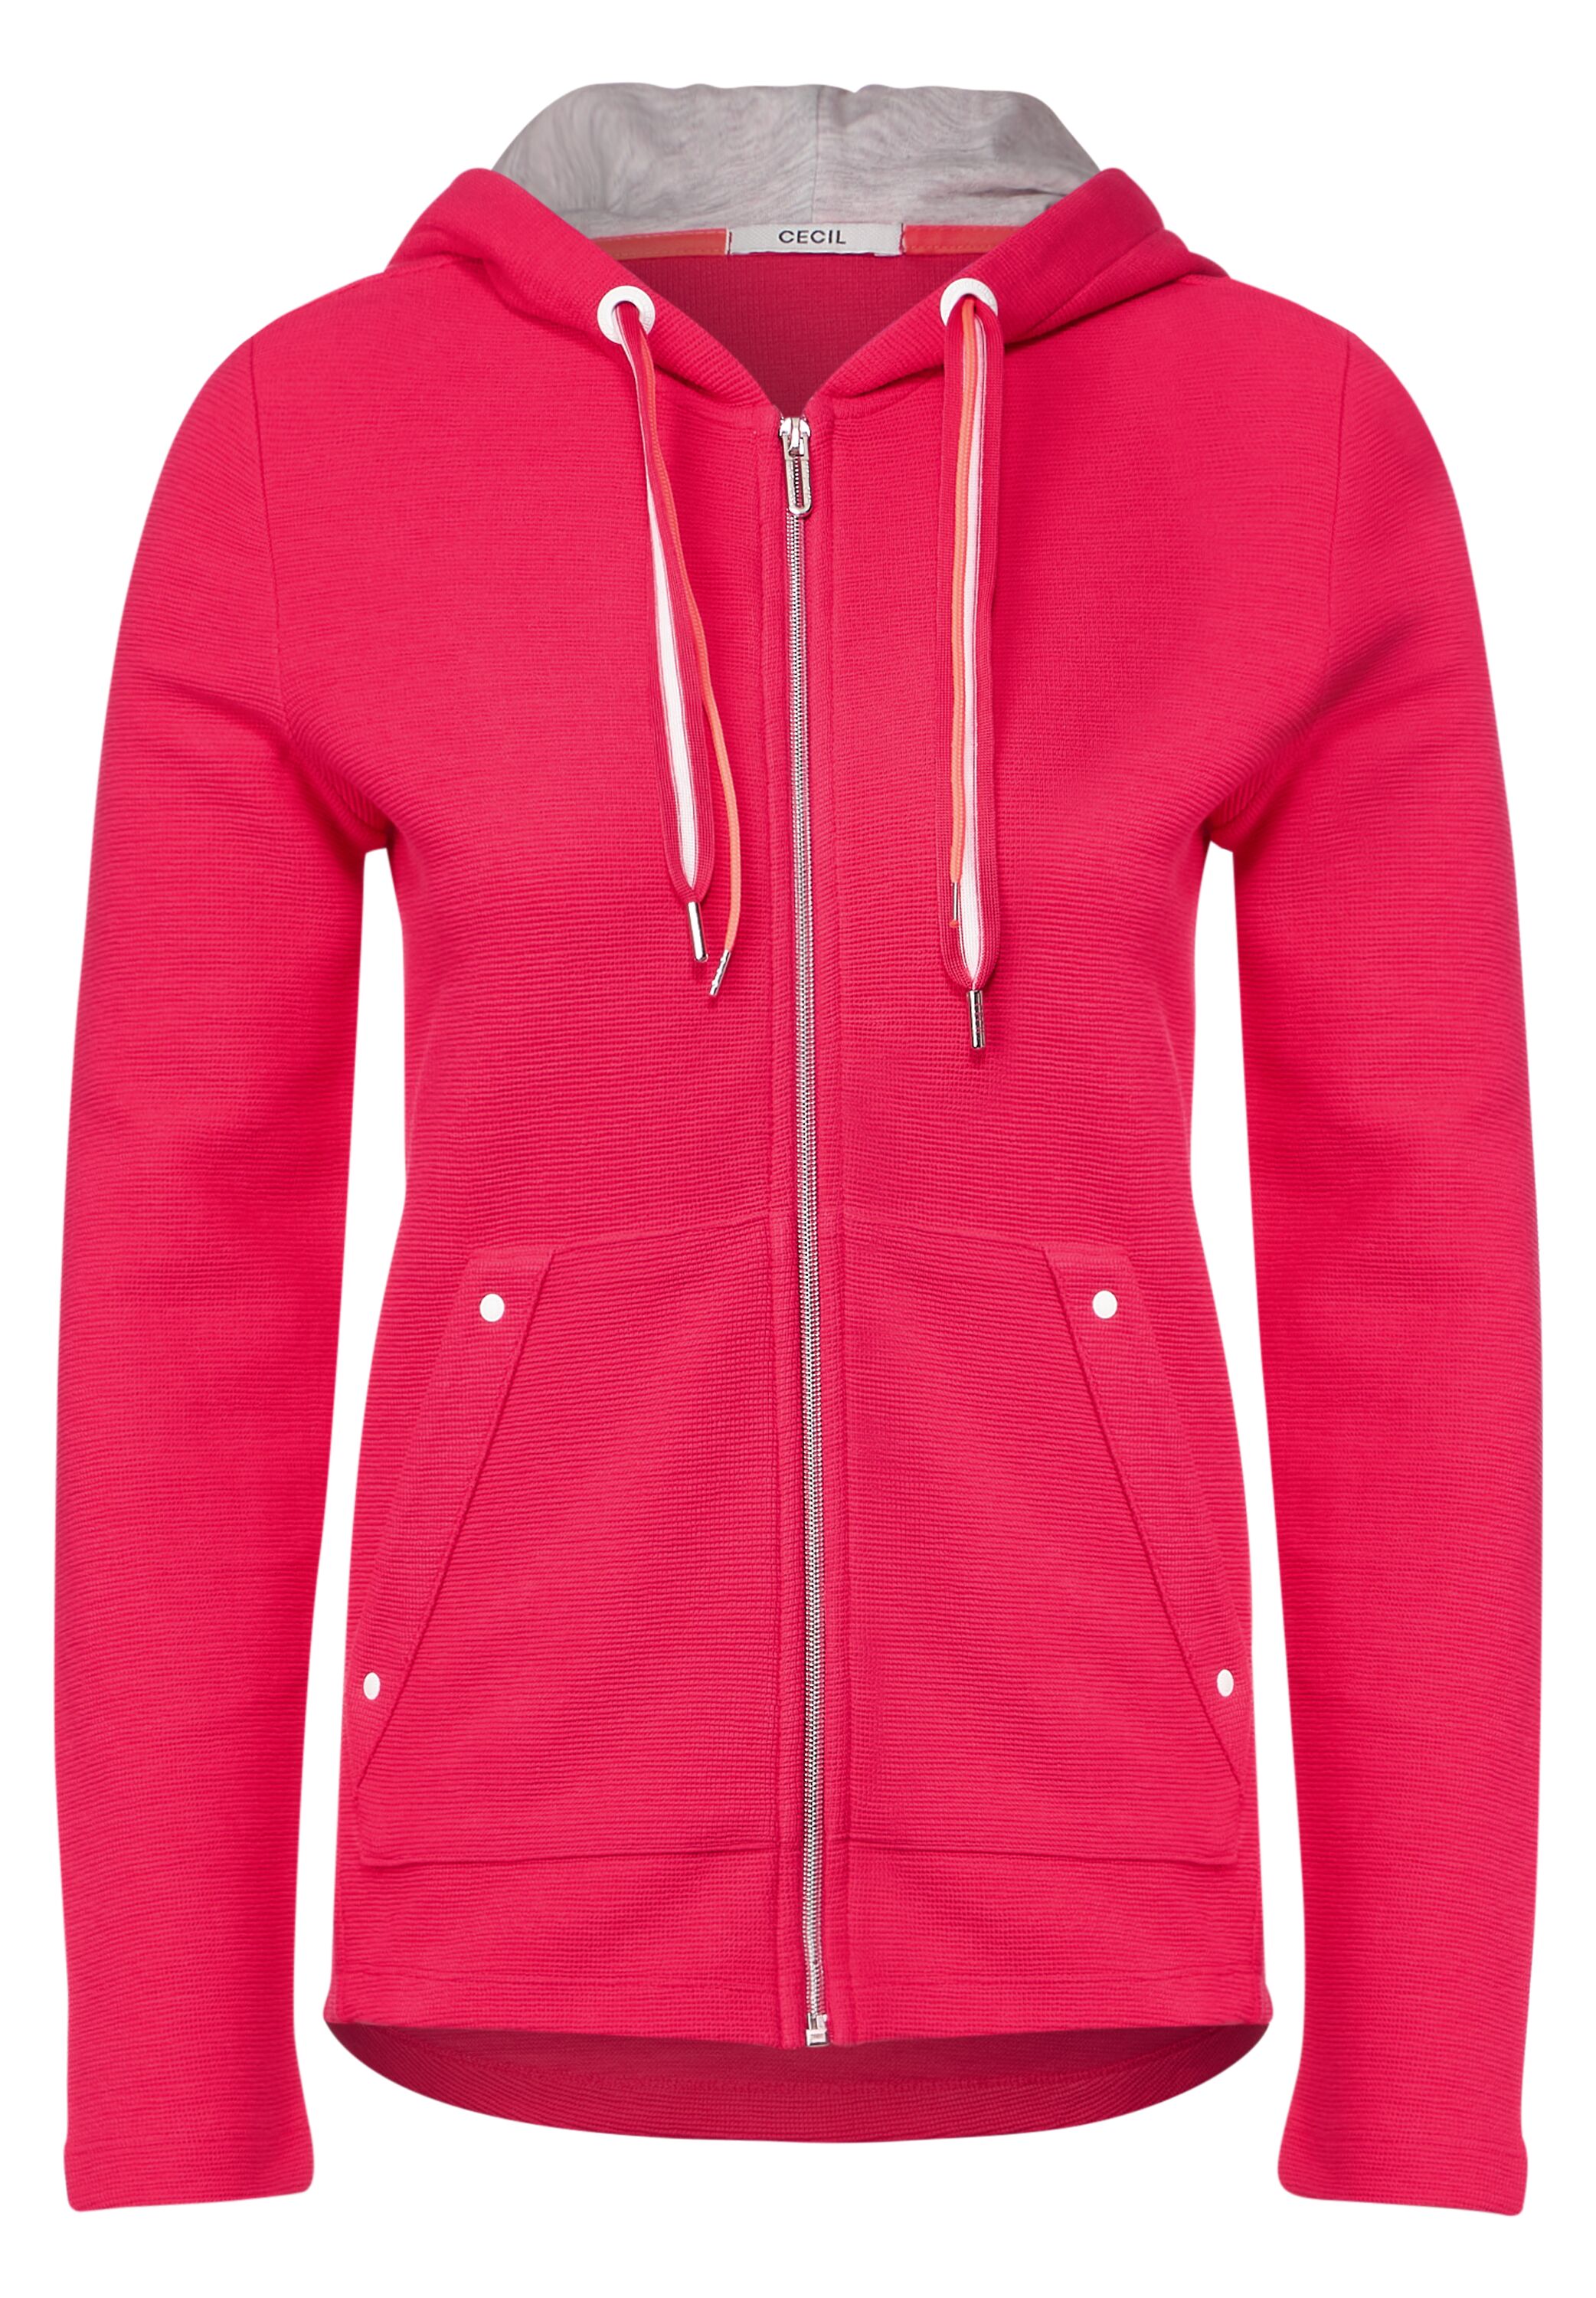 CECIL Shirtjacke in Strawberry Red B319398-14472 Mode reduziert im SALE - CONCEPT